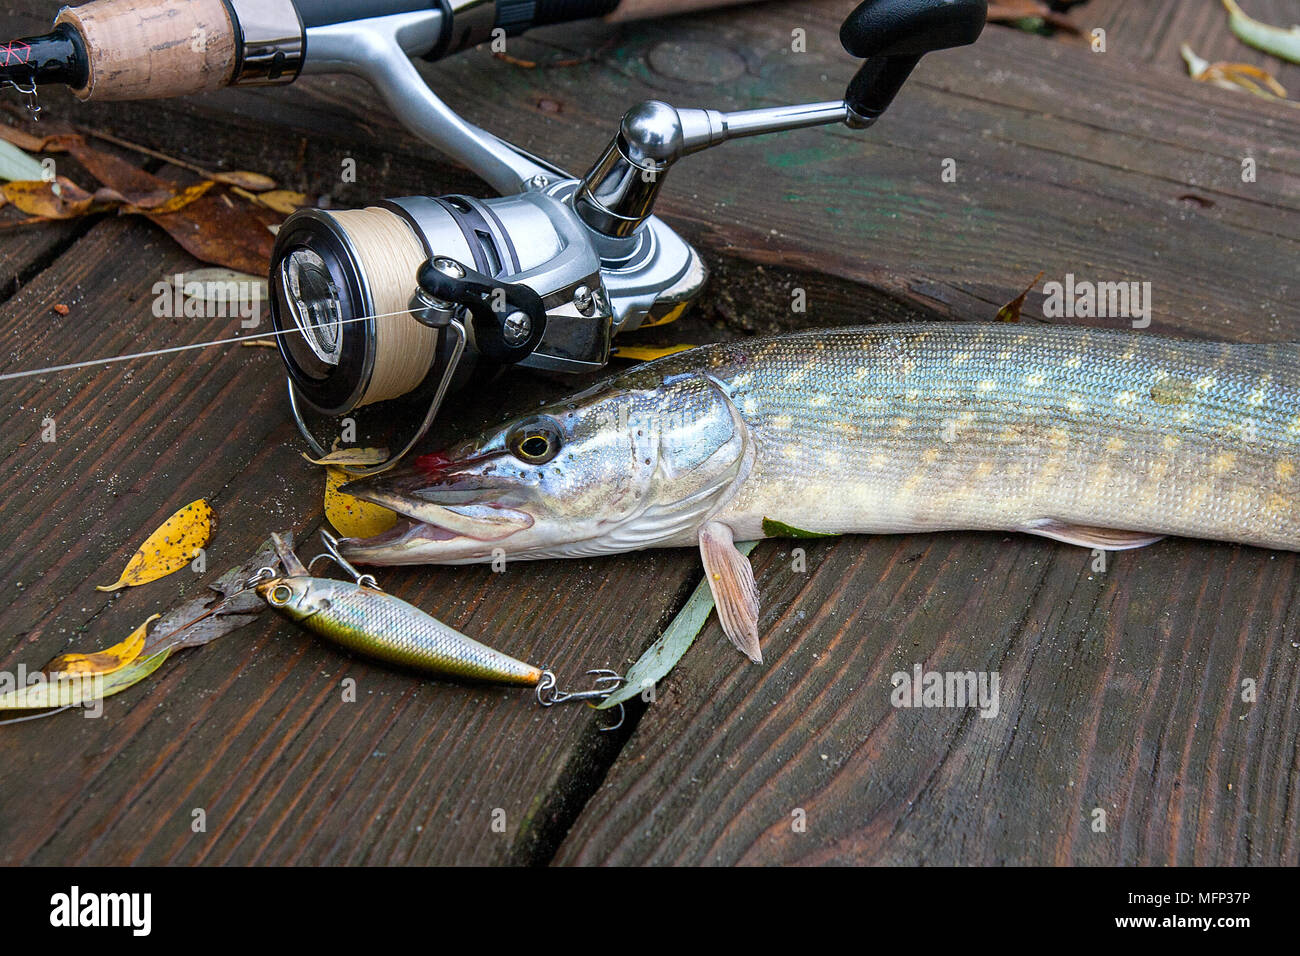 https://c8.alamy.com/comp/MFP37P/freshwater-northern-pike-fish-know-as-esox-lucius-and-fishing-rod-with-reel-lying-on-vintage-wooden-background-with-yellow-leaves-at-autumn-time-fis-MFP37P.jpg